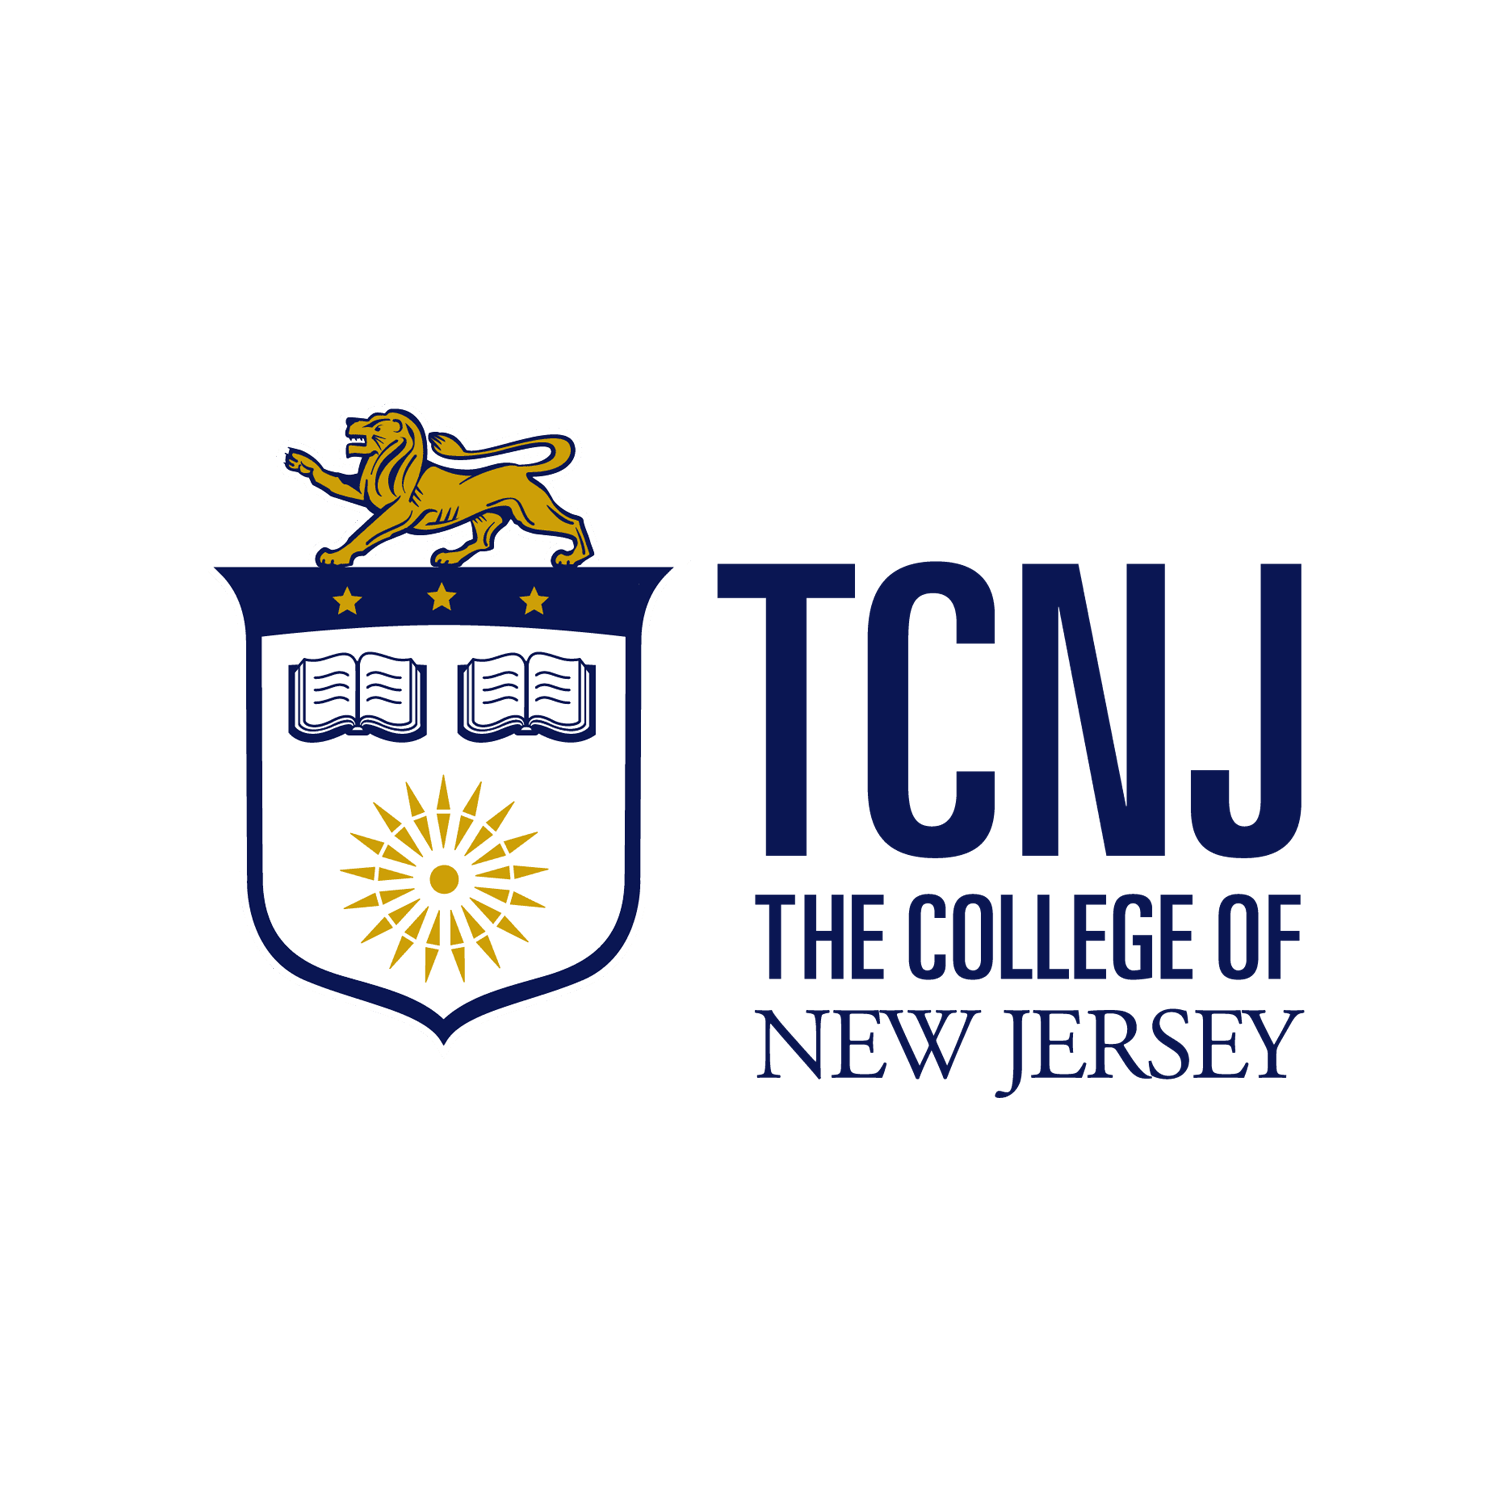 the-college-of-new-jersey-logo-freelogovectors.net_.png